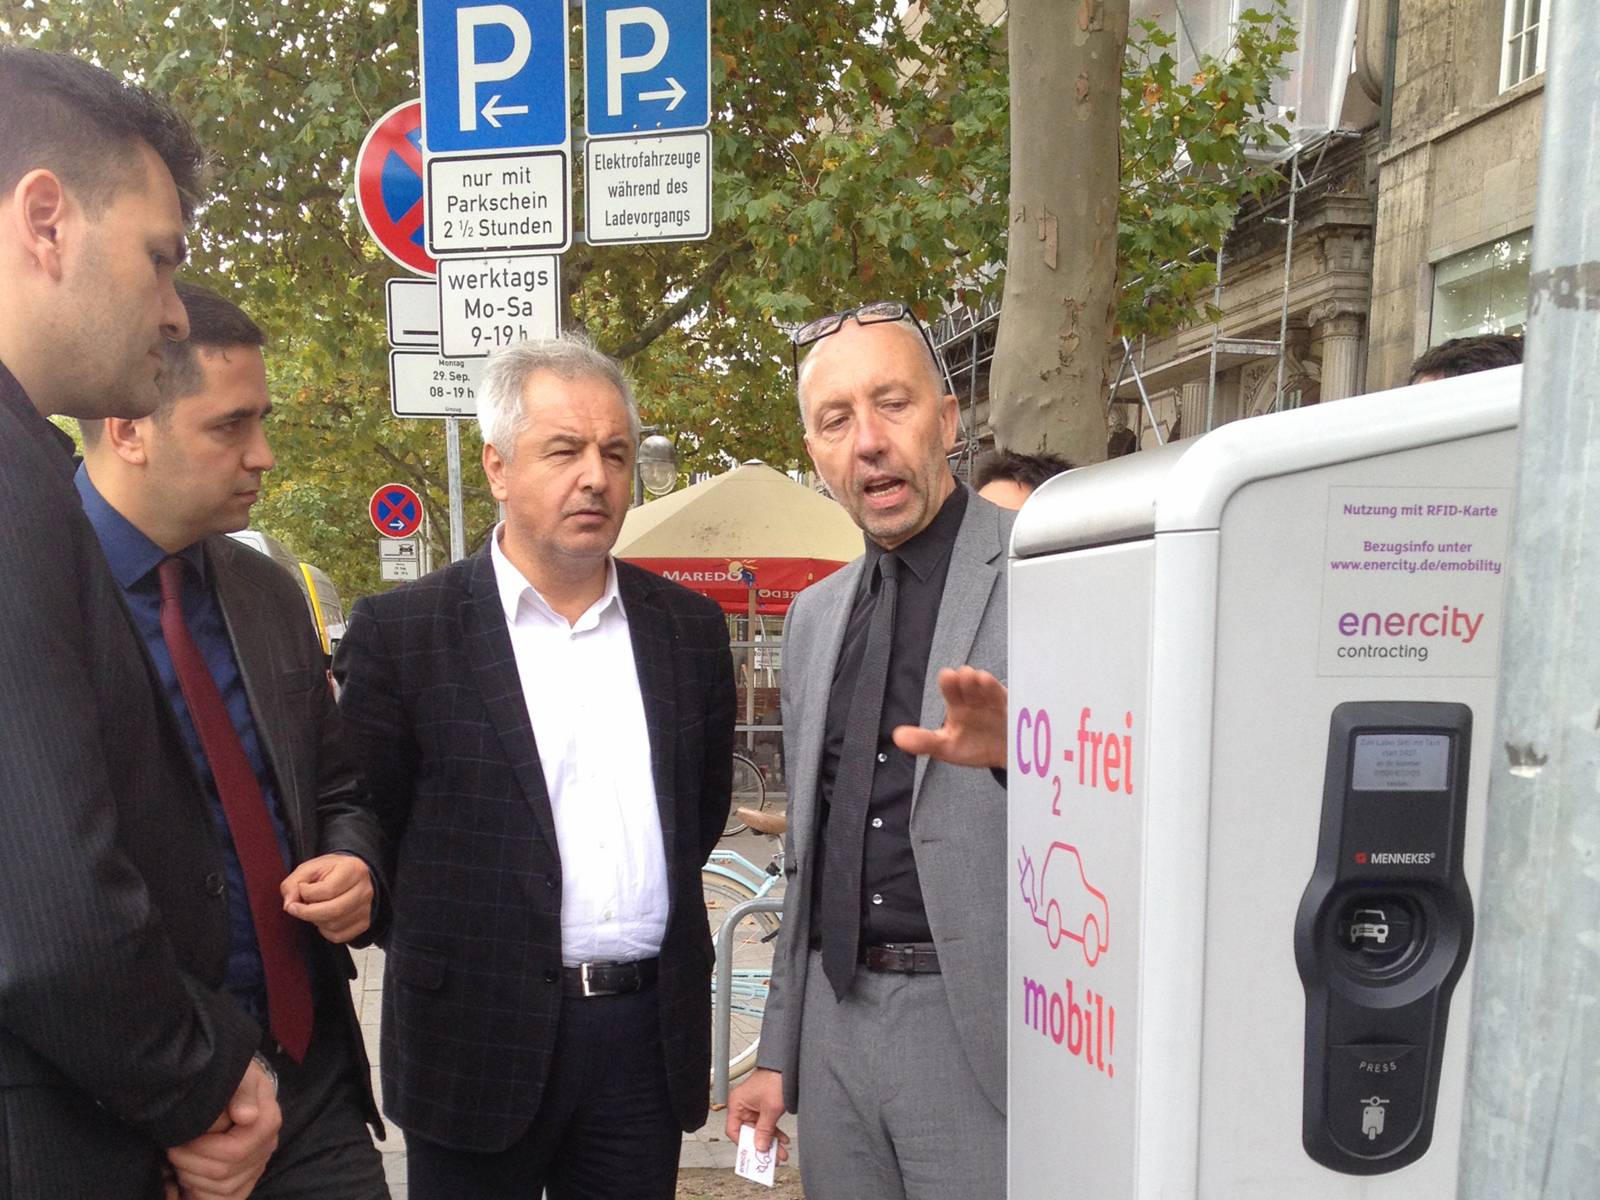 Raimund Nowak informs Ercan Urslu about the charging of VW’s electrically powered eUP on Hannover’s Georgstrasse